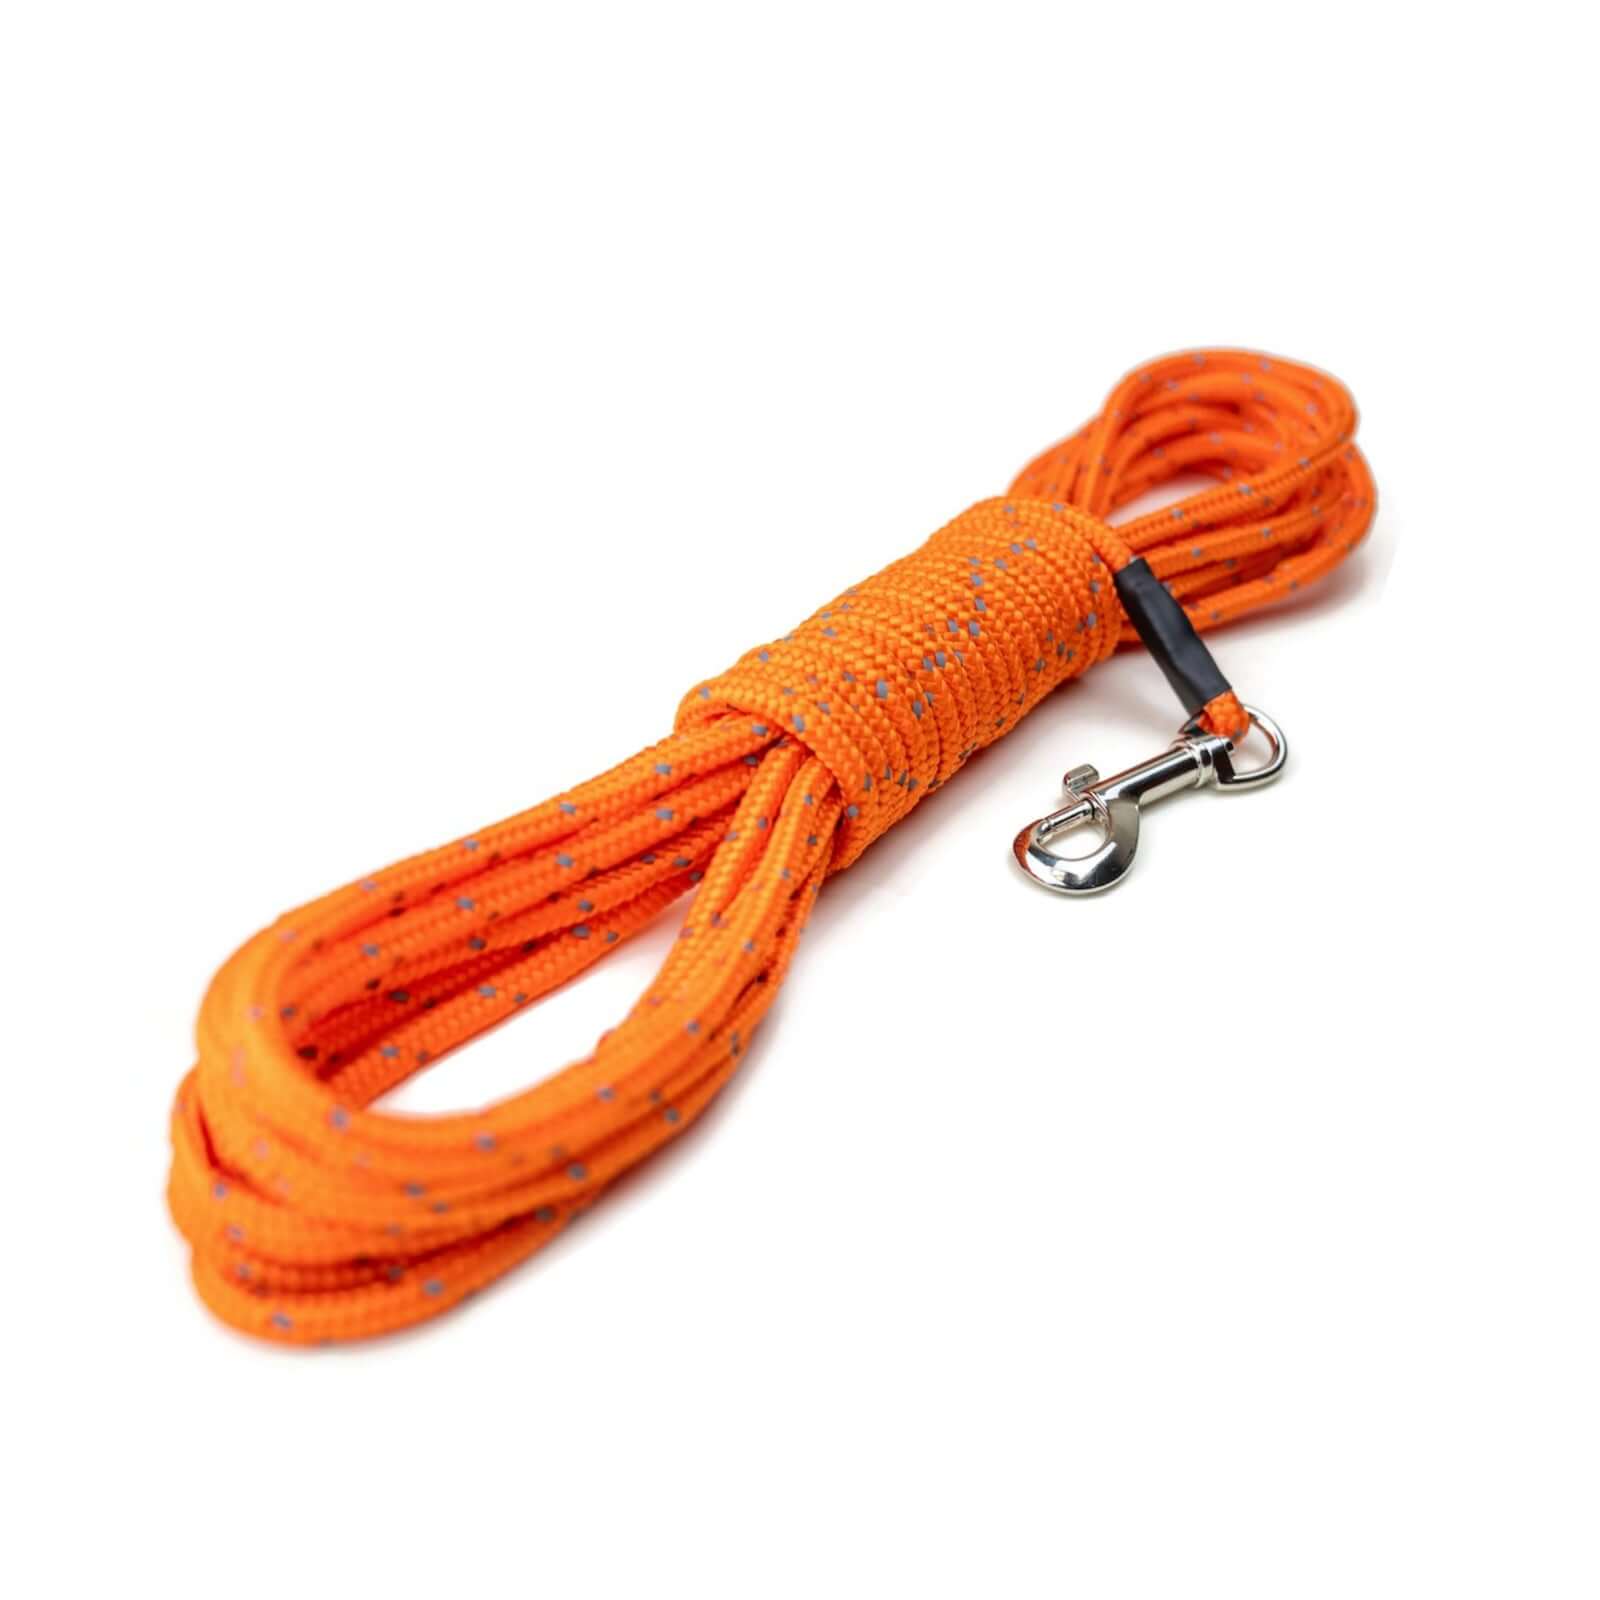 30' Check Cord for Dog Training, Agility & Water Play